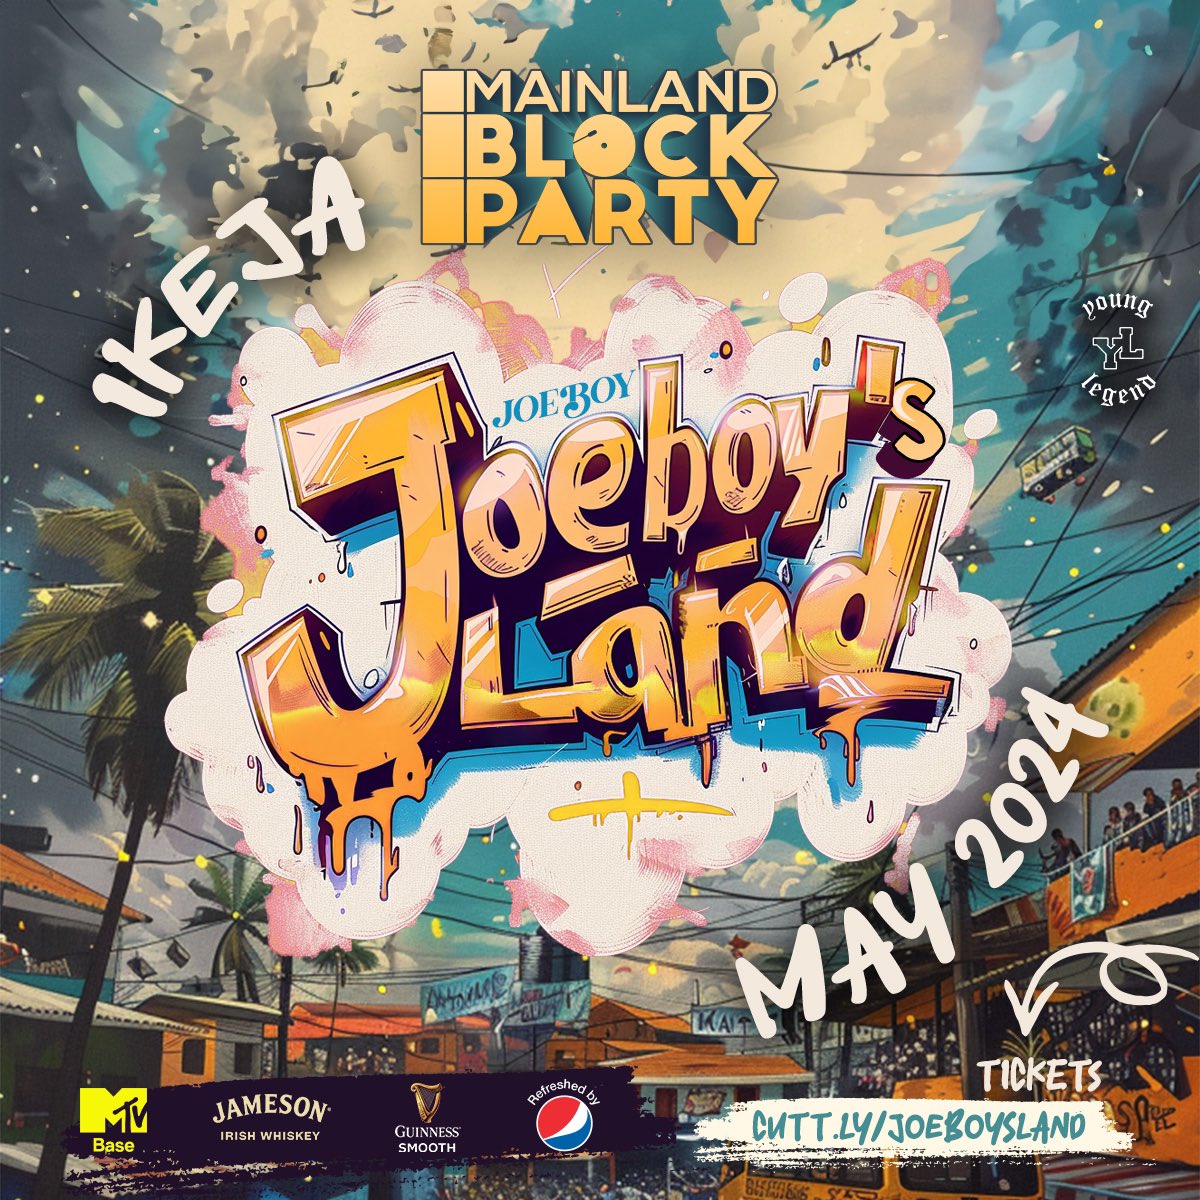 Mainland!!! Ikeja! We are back this month with @Joeboy, our soundsystem @blckpartyradio_ and some of your Faves !!! Let’s vibe to Marsssss!!!! Early Bird Tix out now: cutt.ly/JOEBOYSLAND Tell a Friend 🧡❤️⛳️🔌.